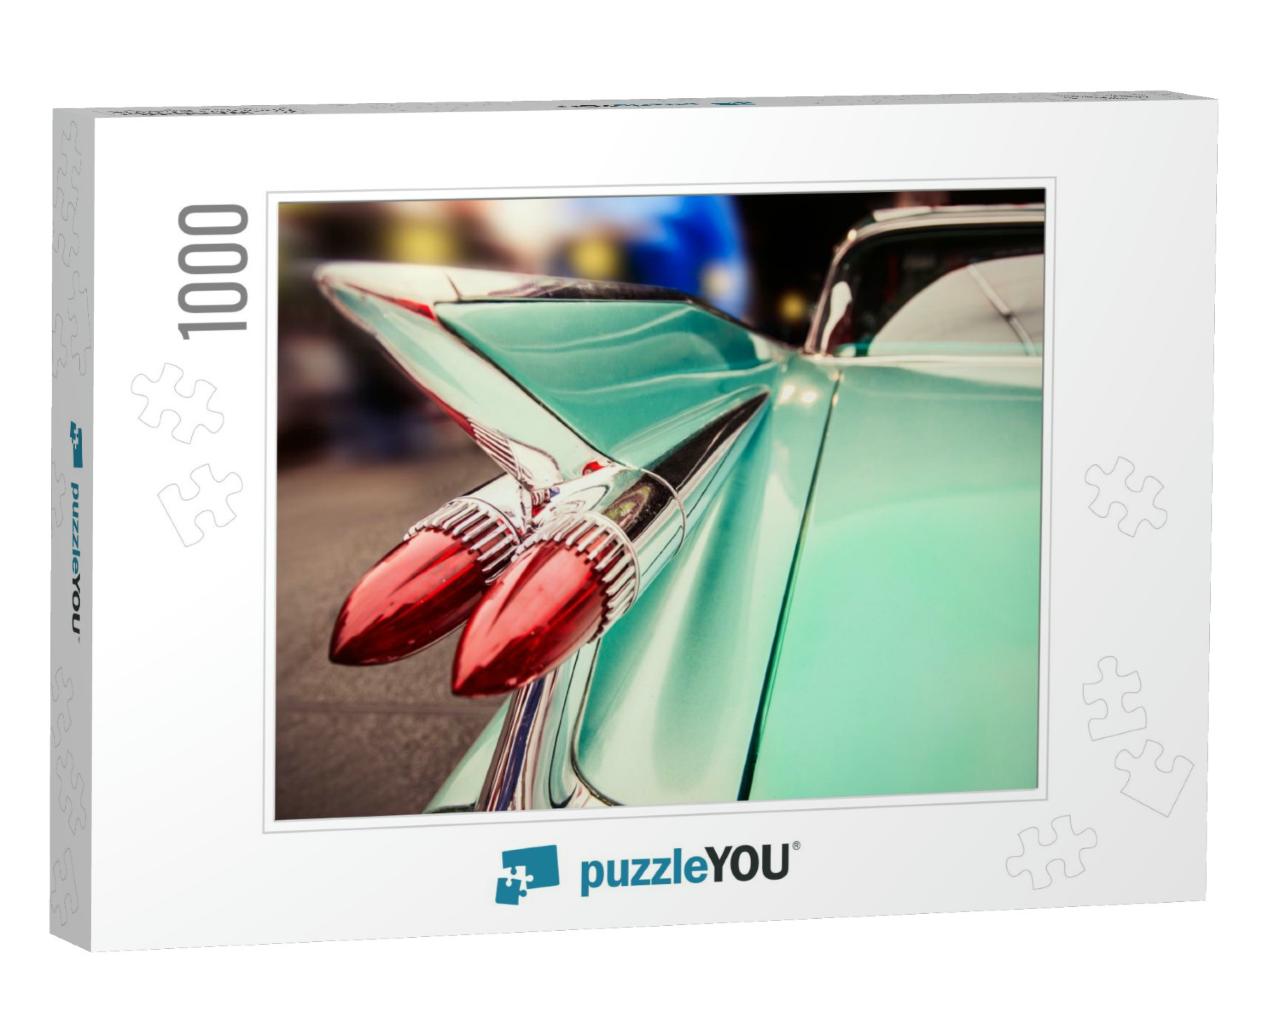 Luxury Retro Car Driving in Las Vegas Night City Street... Jigsaw Puzzle with 1000 pieces